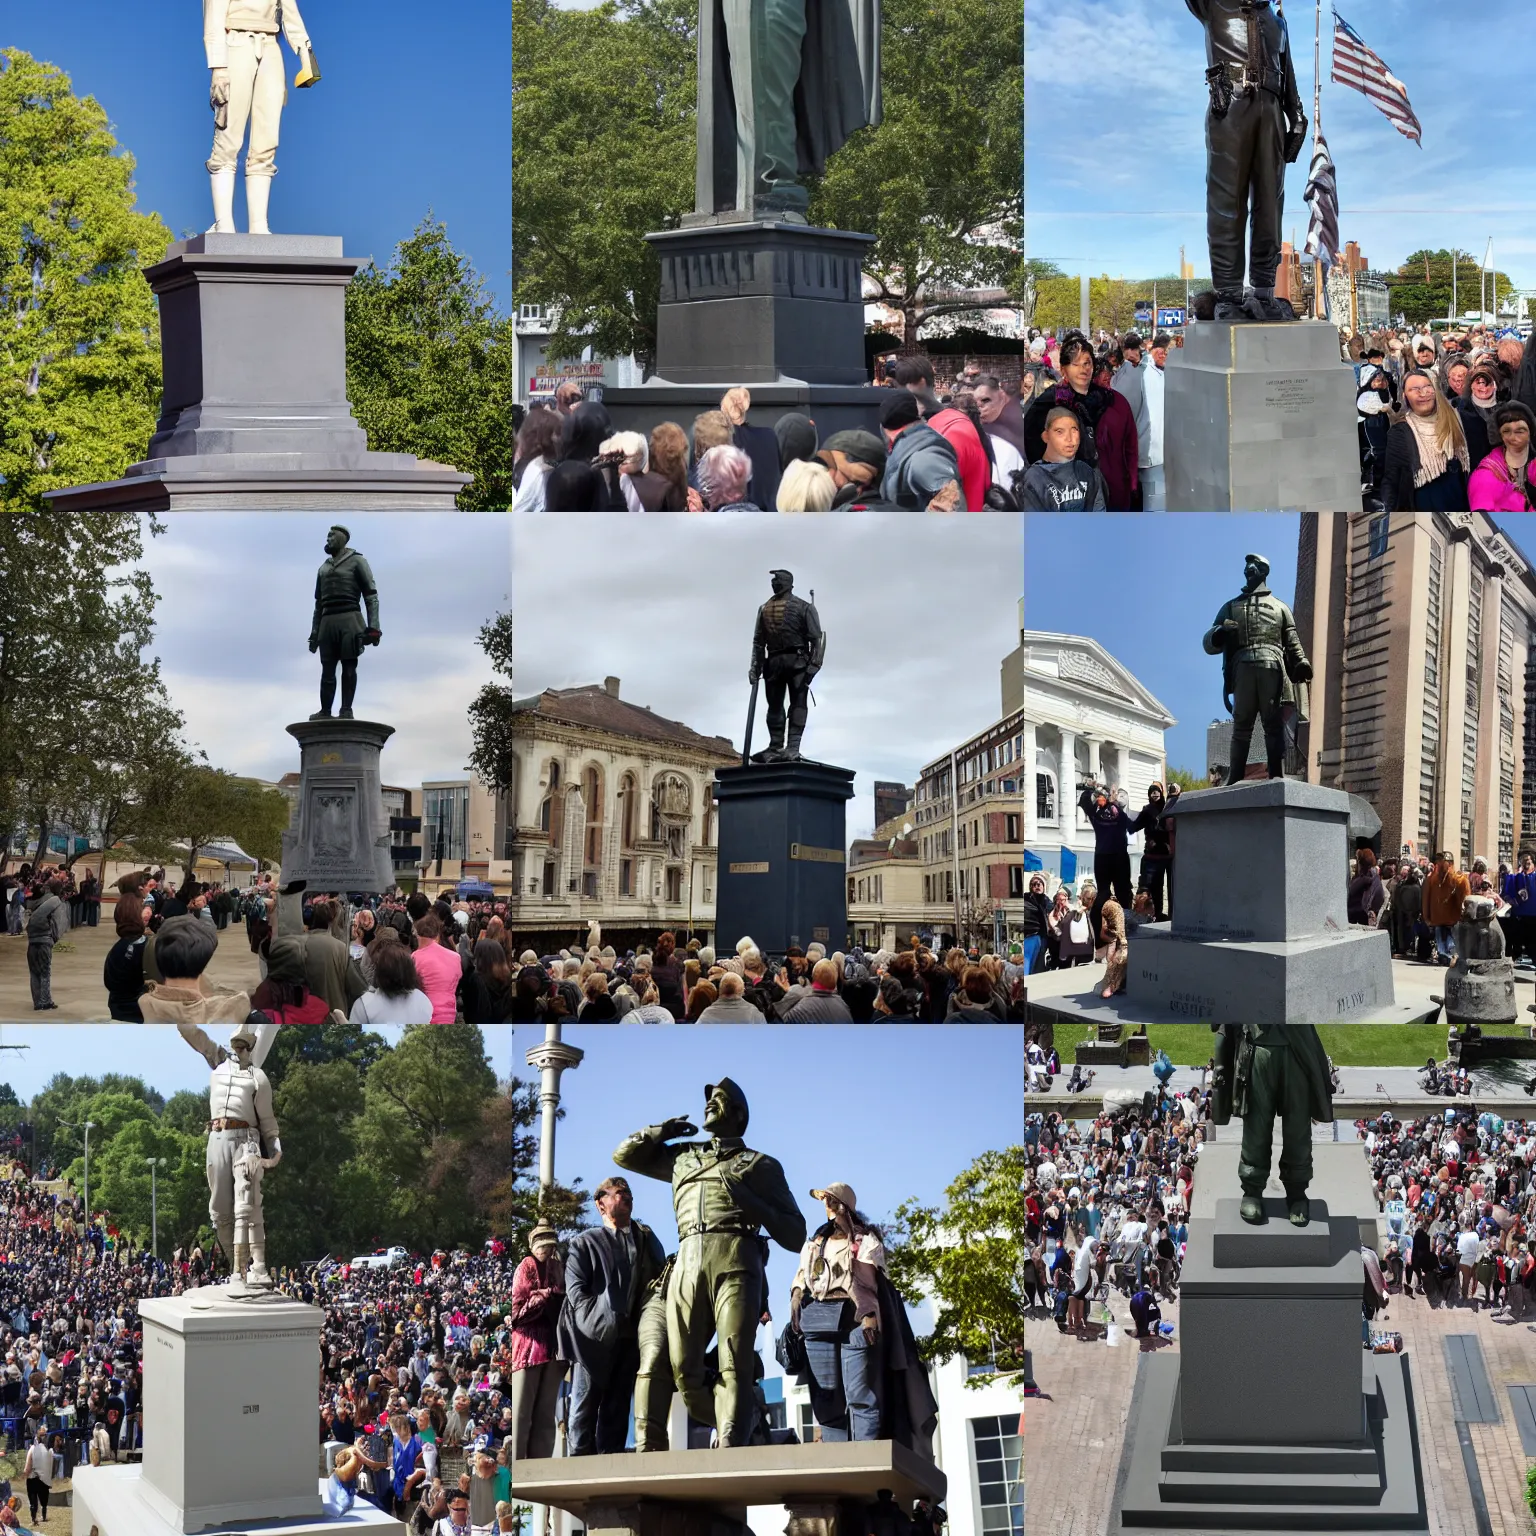 Prompt: the statue of captain carter stands atop a large plinth surrounded by people